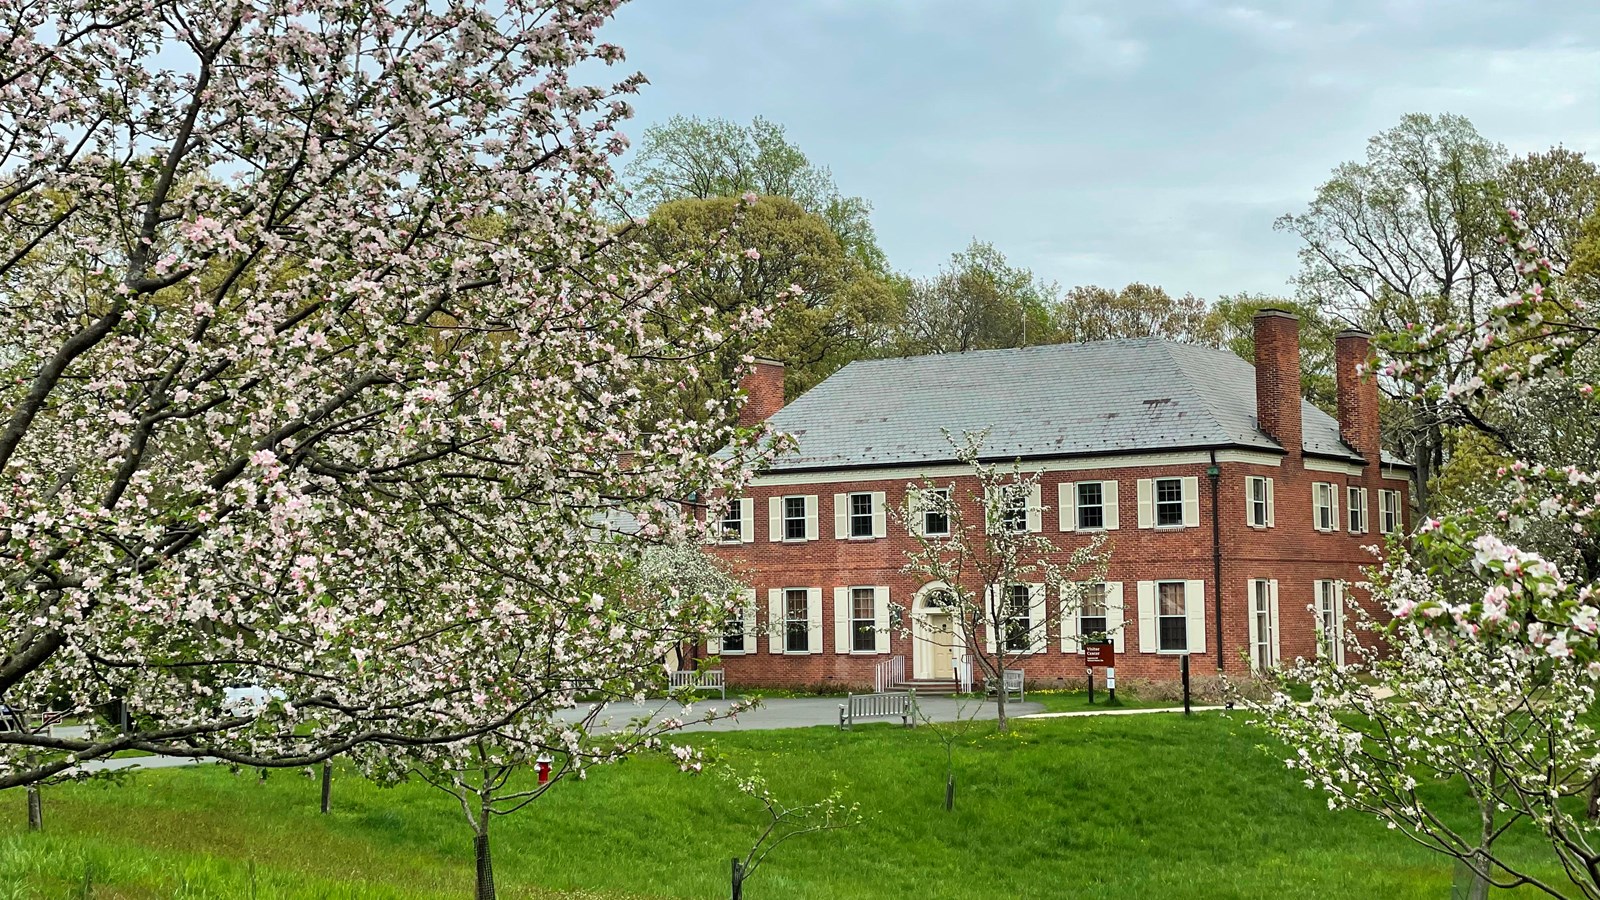 A large brick house with white shutters and blossoming apple trees in the foreground.